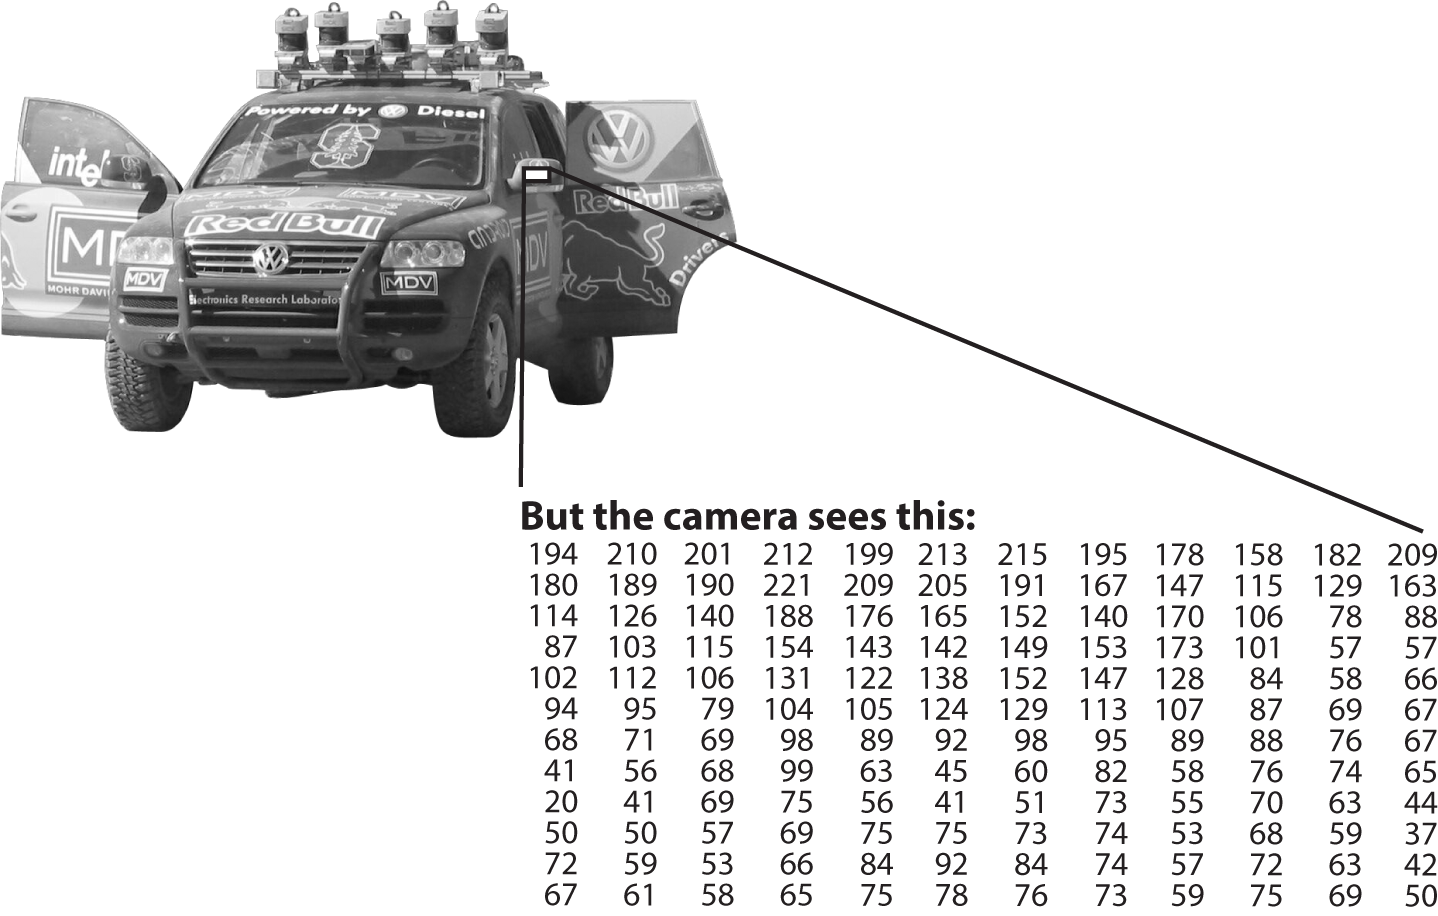 To a computer, the car’s side mirror is just a grid of numbers